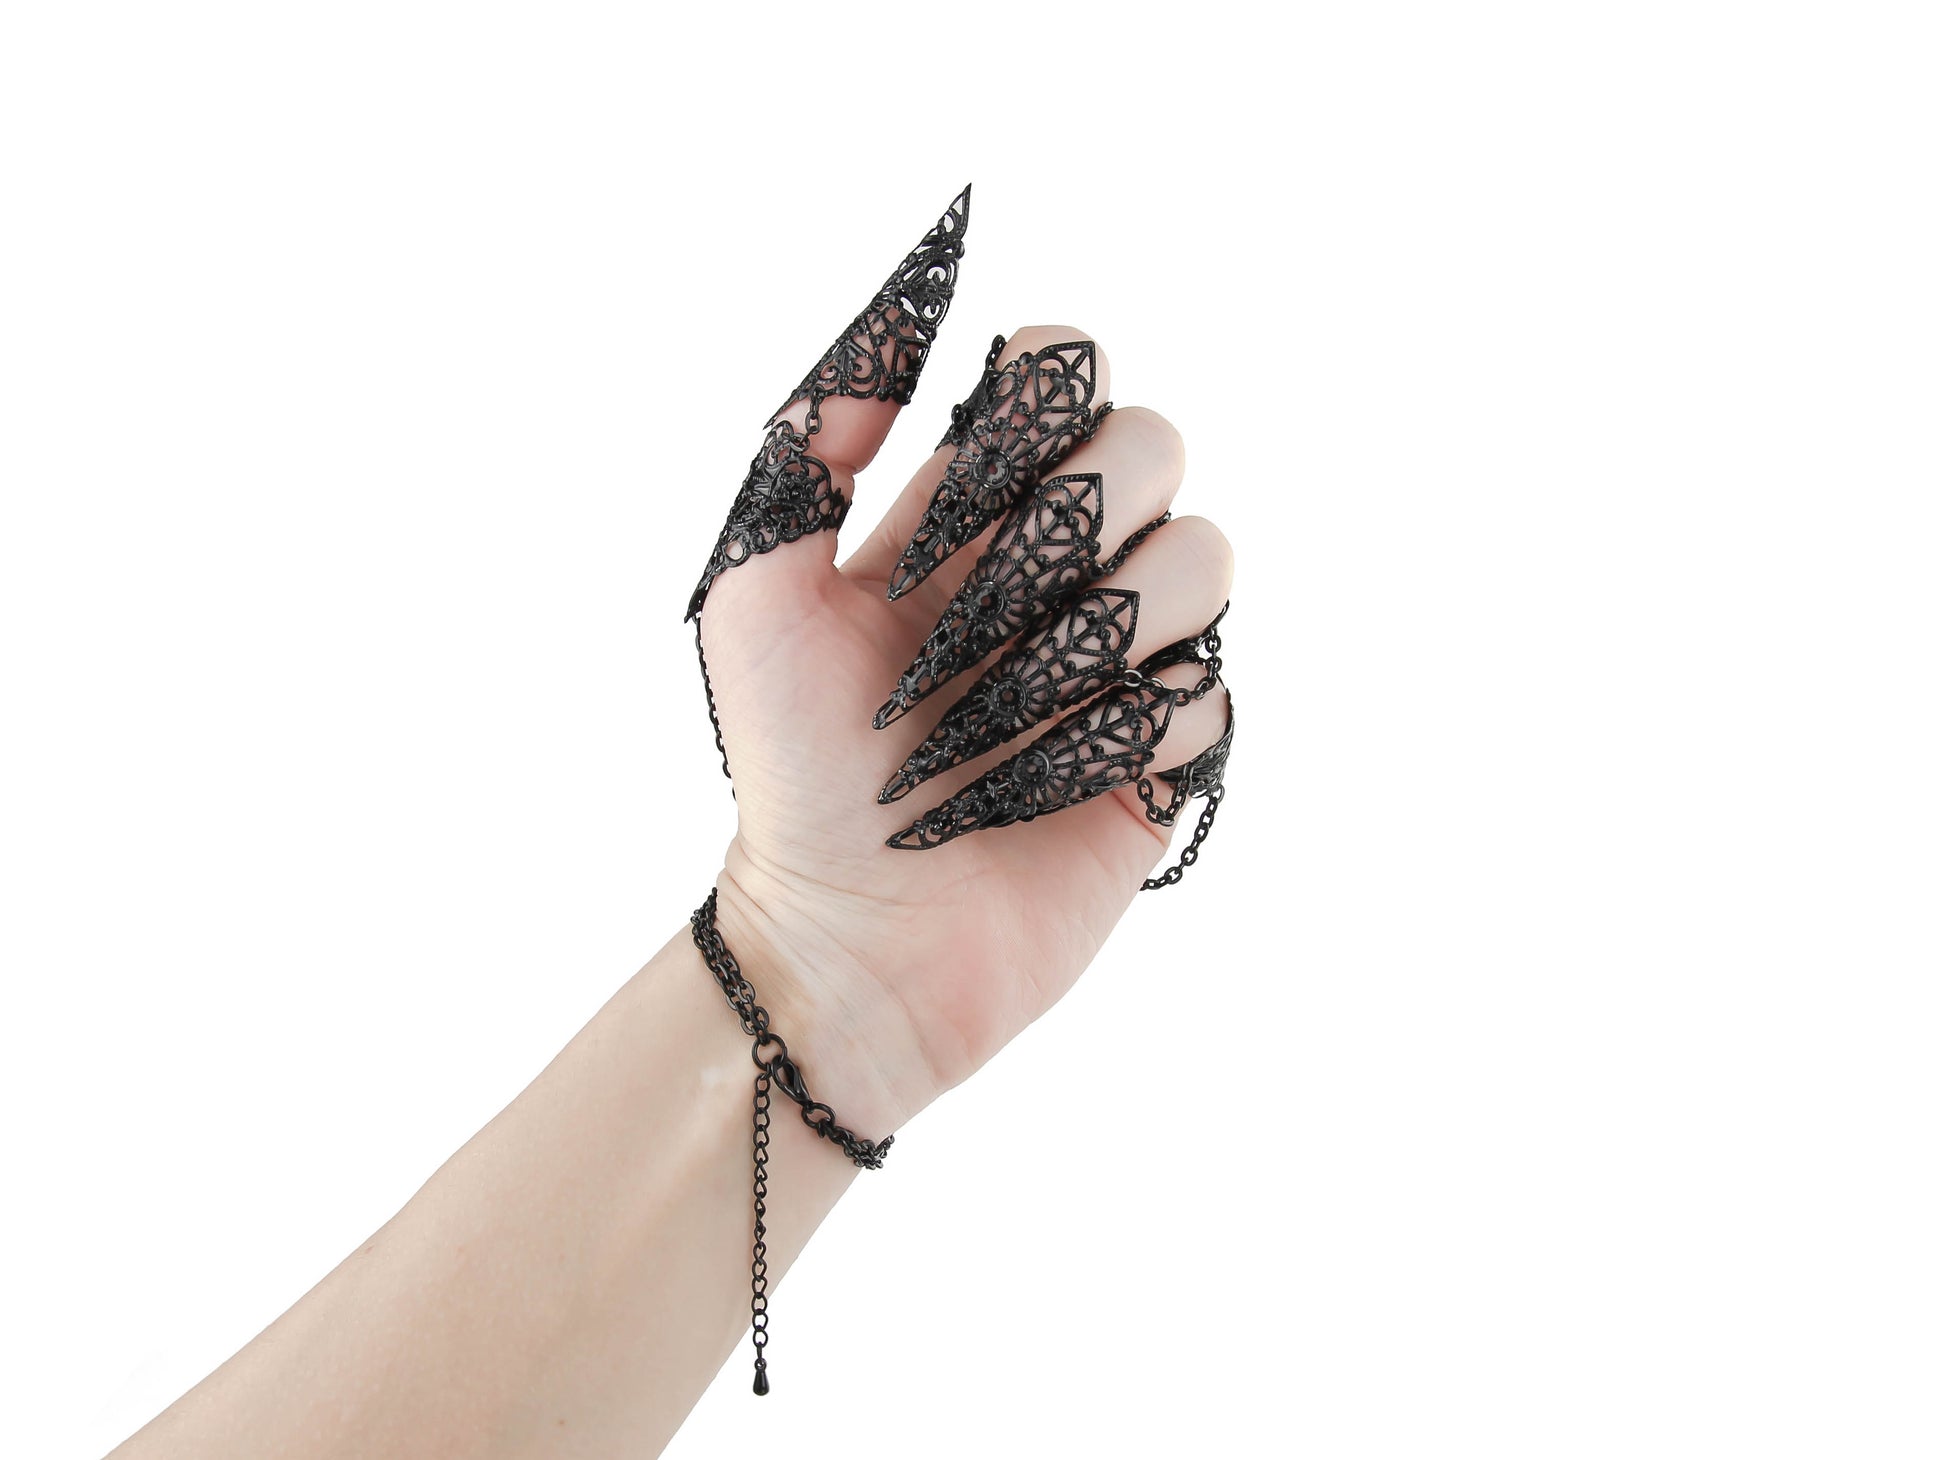 A fashion-forward black metal glove adorned with finger claw rings by Myril Jewels, epitomizing the essence of neo-gothic style. This striking accessory merges dark avant-garde aesthetics with bold, gothic-chic flair, perfect for Halloween, rave parties, or as a unique gift for goth enthusiasts.